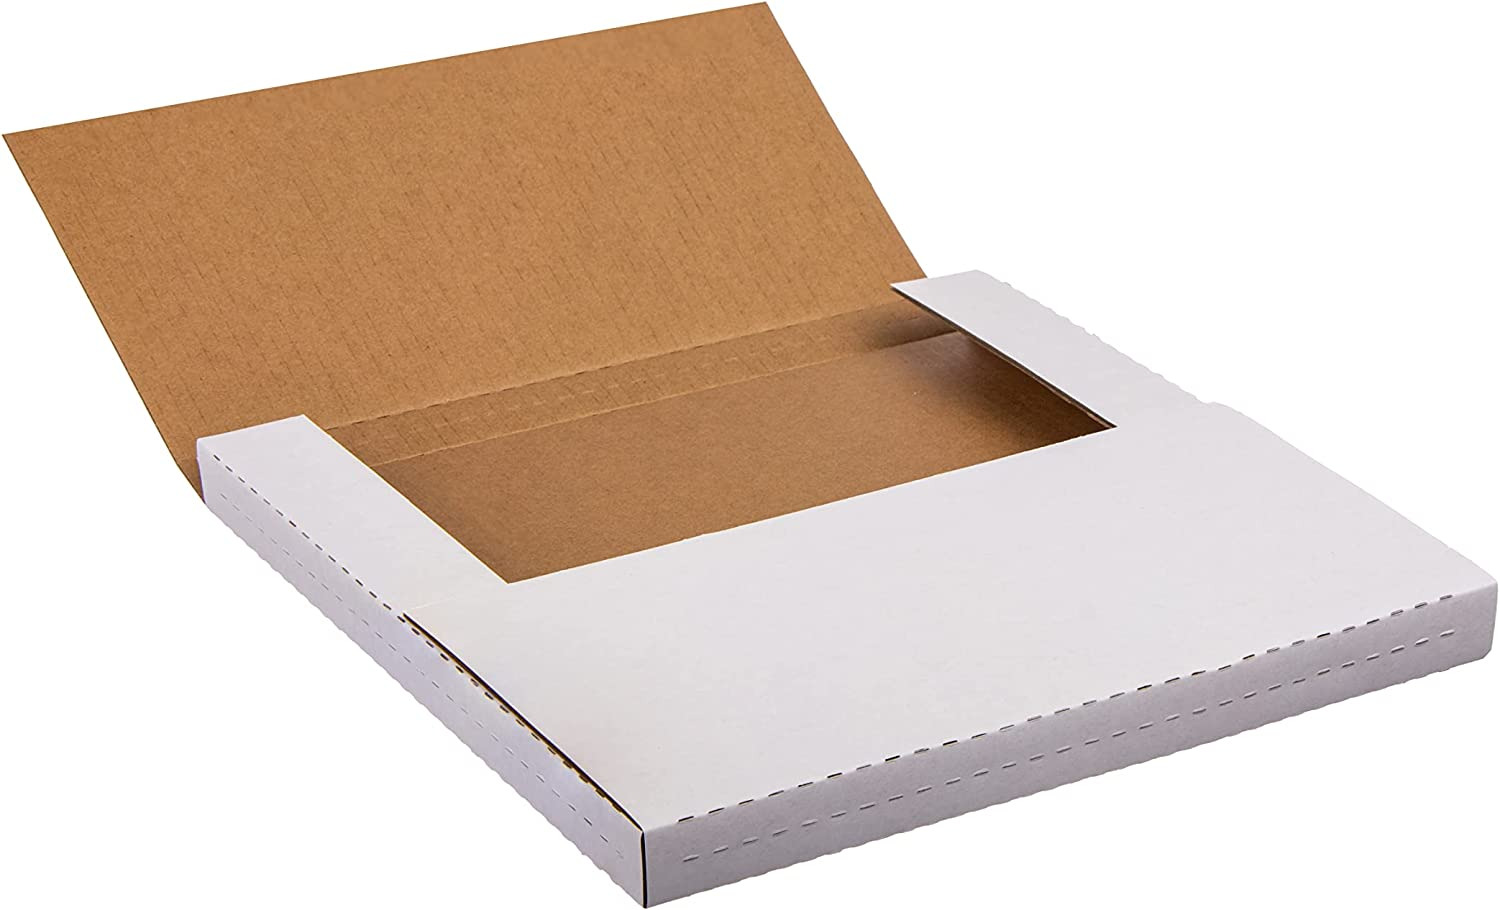 12.5″L X 12.5″W X 1″H Vinyl Records Shipping Boxes, Adjustable Height Corrugated